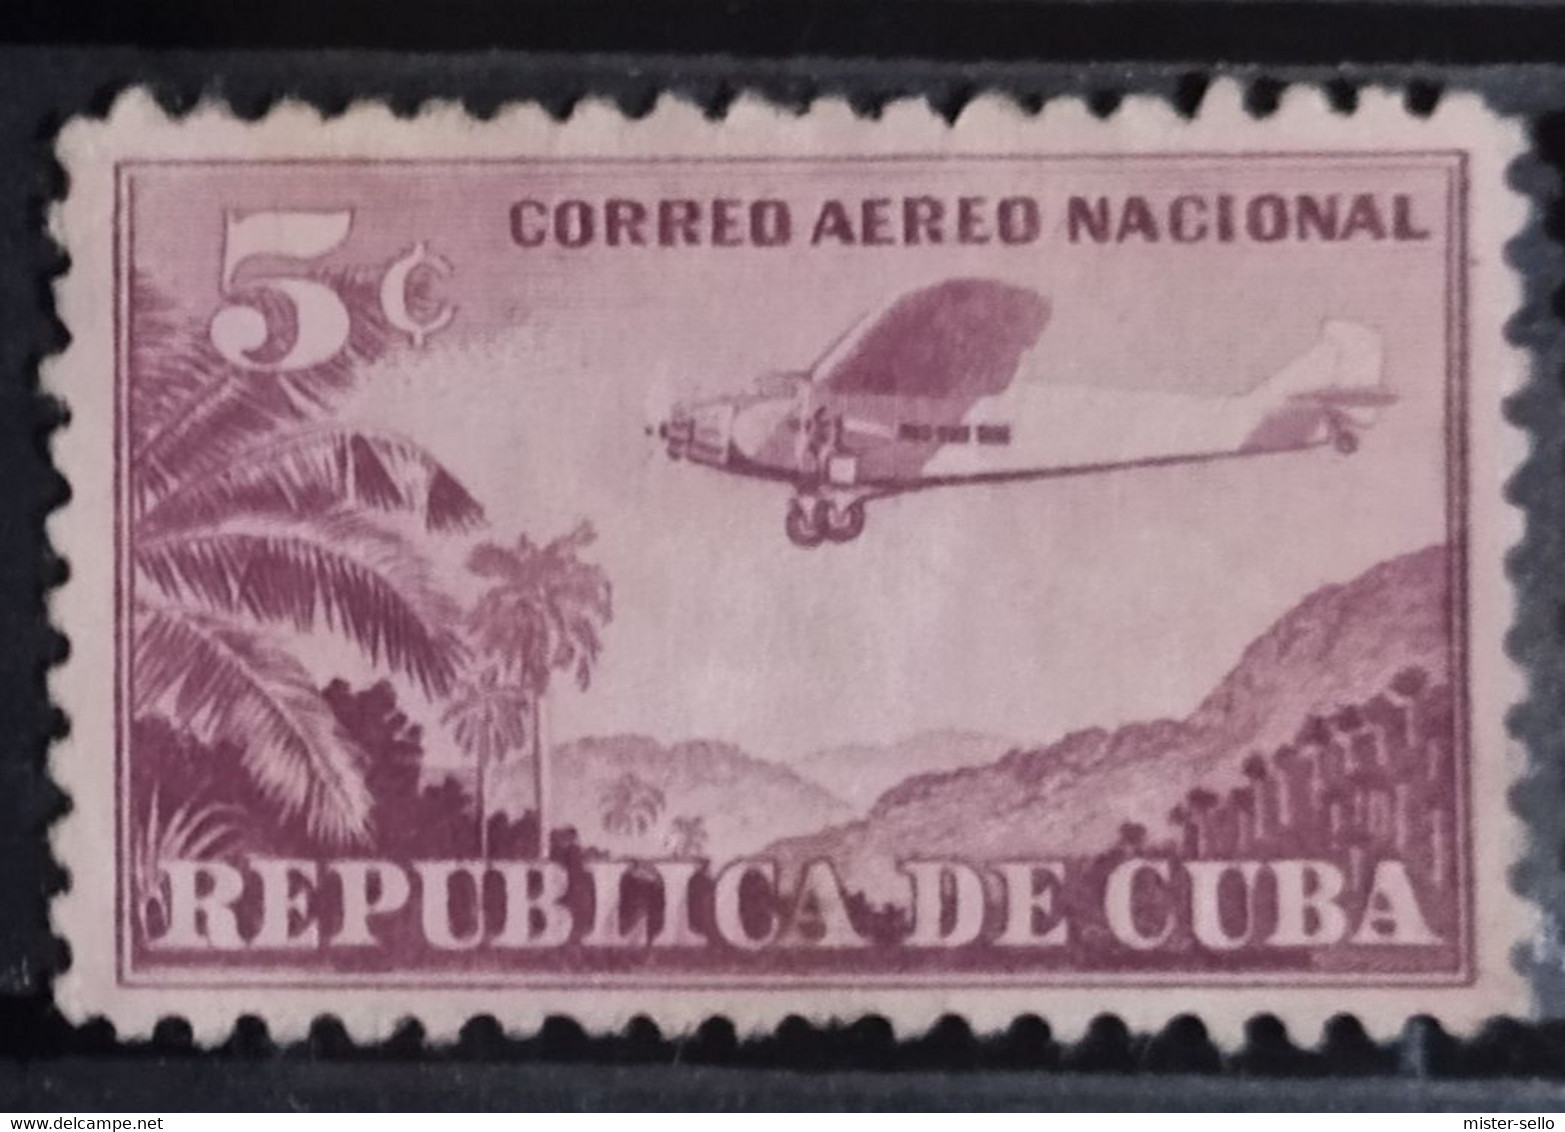 ÇARIBE 1931 Airmail - For Domestic Use. USADO - USED. - Oblitérés